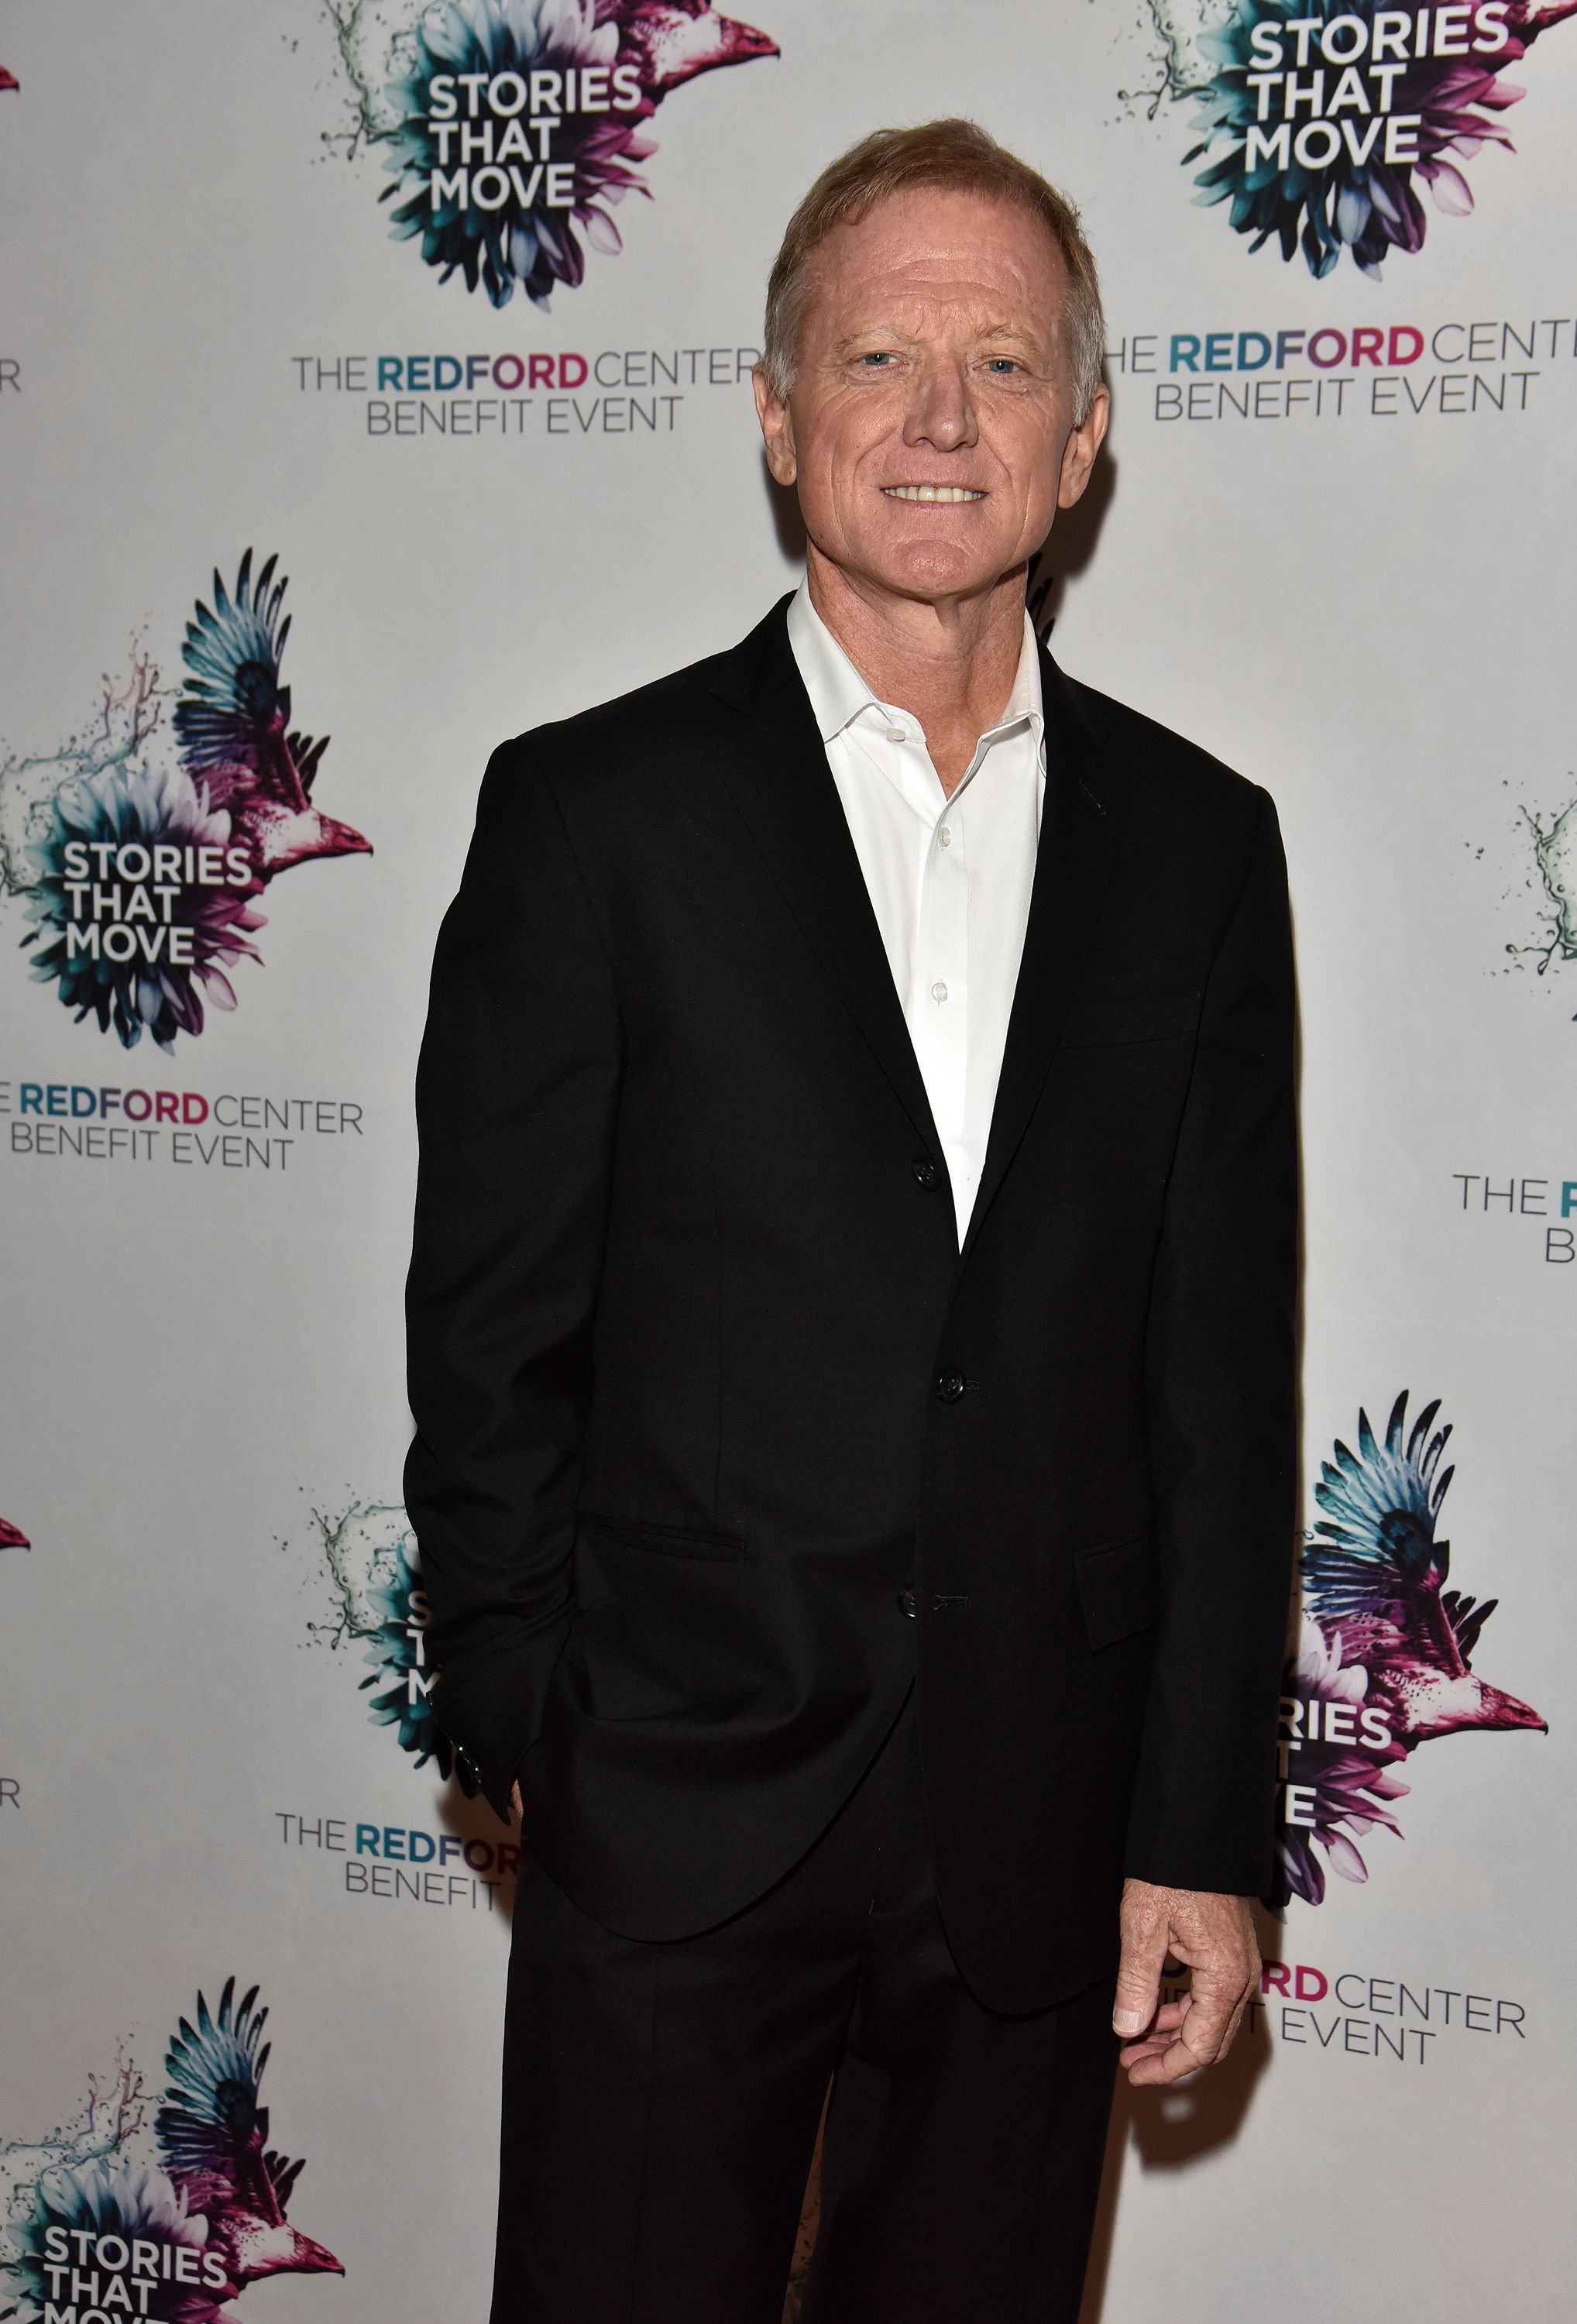 James Redford at The Redford Center's Benefit at August Hall on December 6, 2018, in San Francisco, California | Photo: Tim Mosenfelder/Getty Images